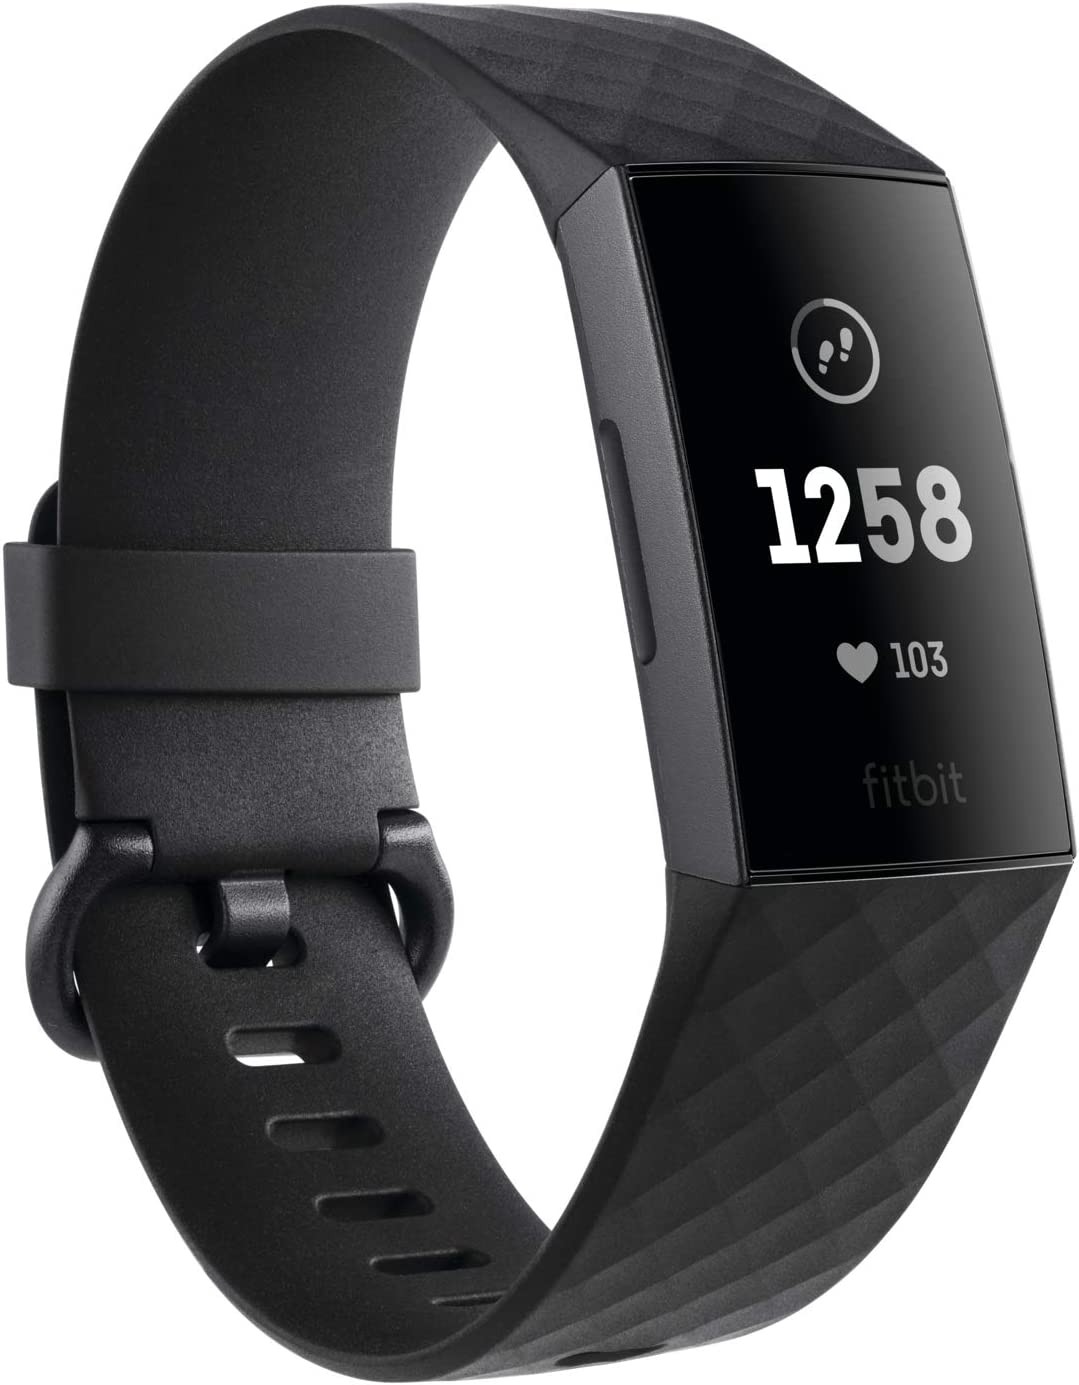 Fitbit Charge 3 Advanced Fitness Tracker with Heart Rate, Graphite/Black, One Size